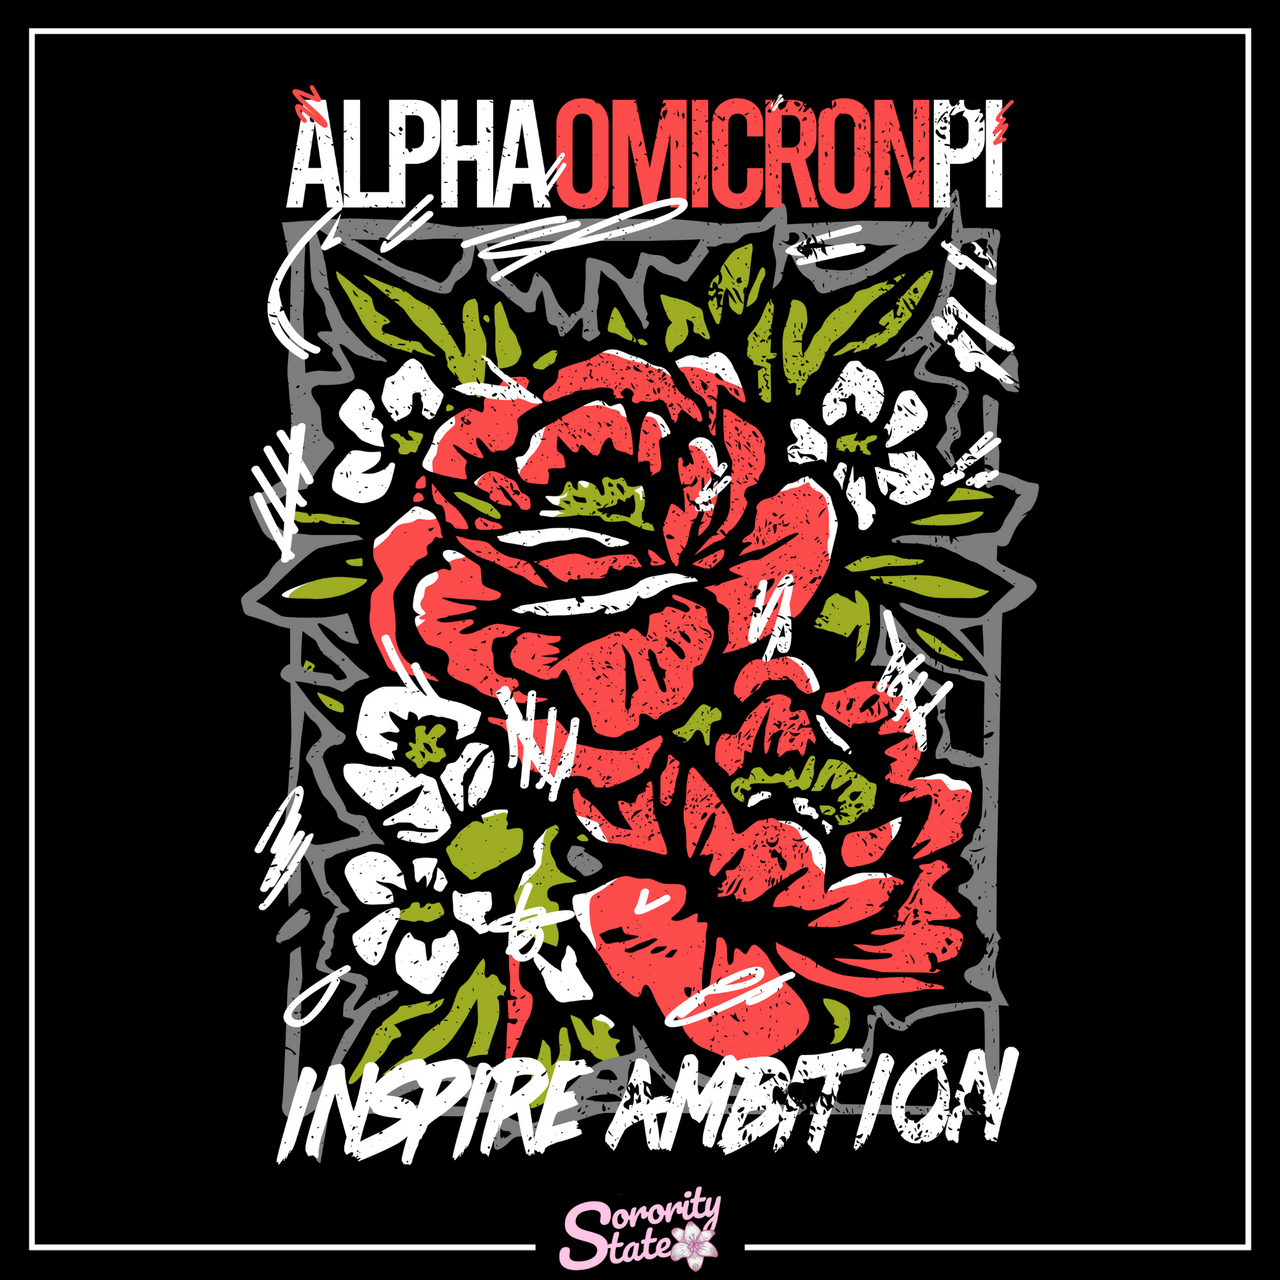 Alpha Omicron Pi Graphic Hoodie | Grunge Roses